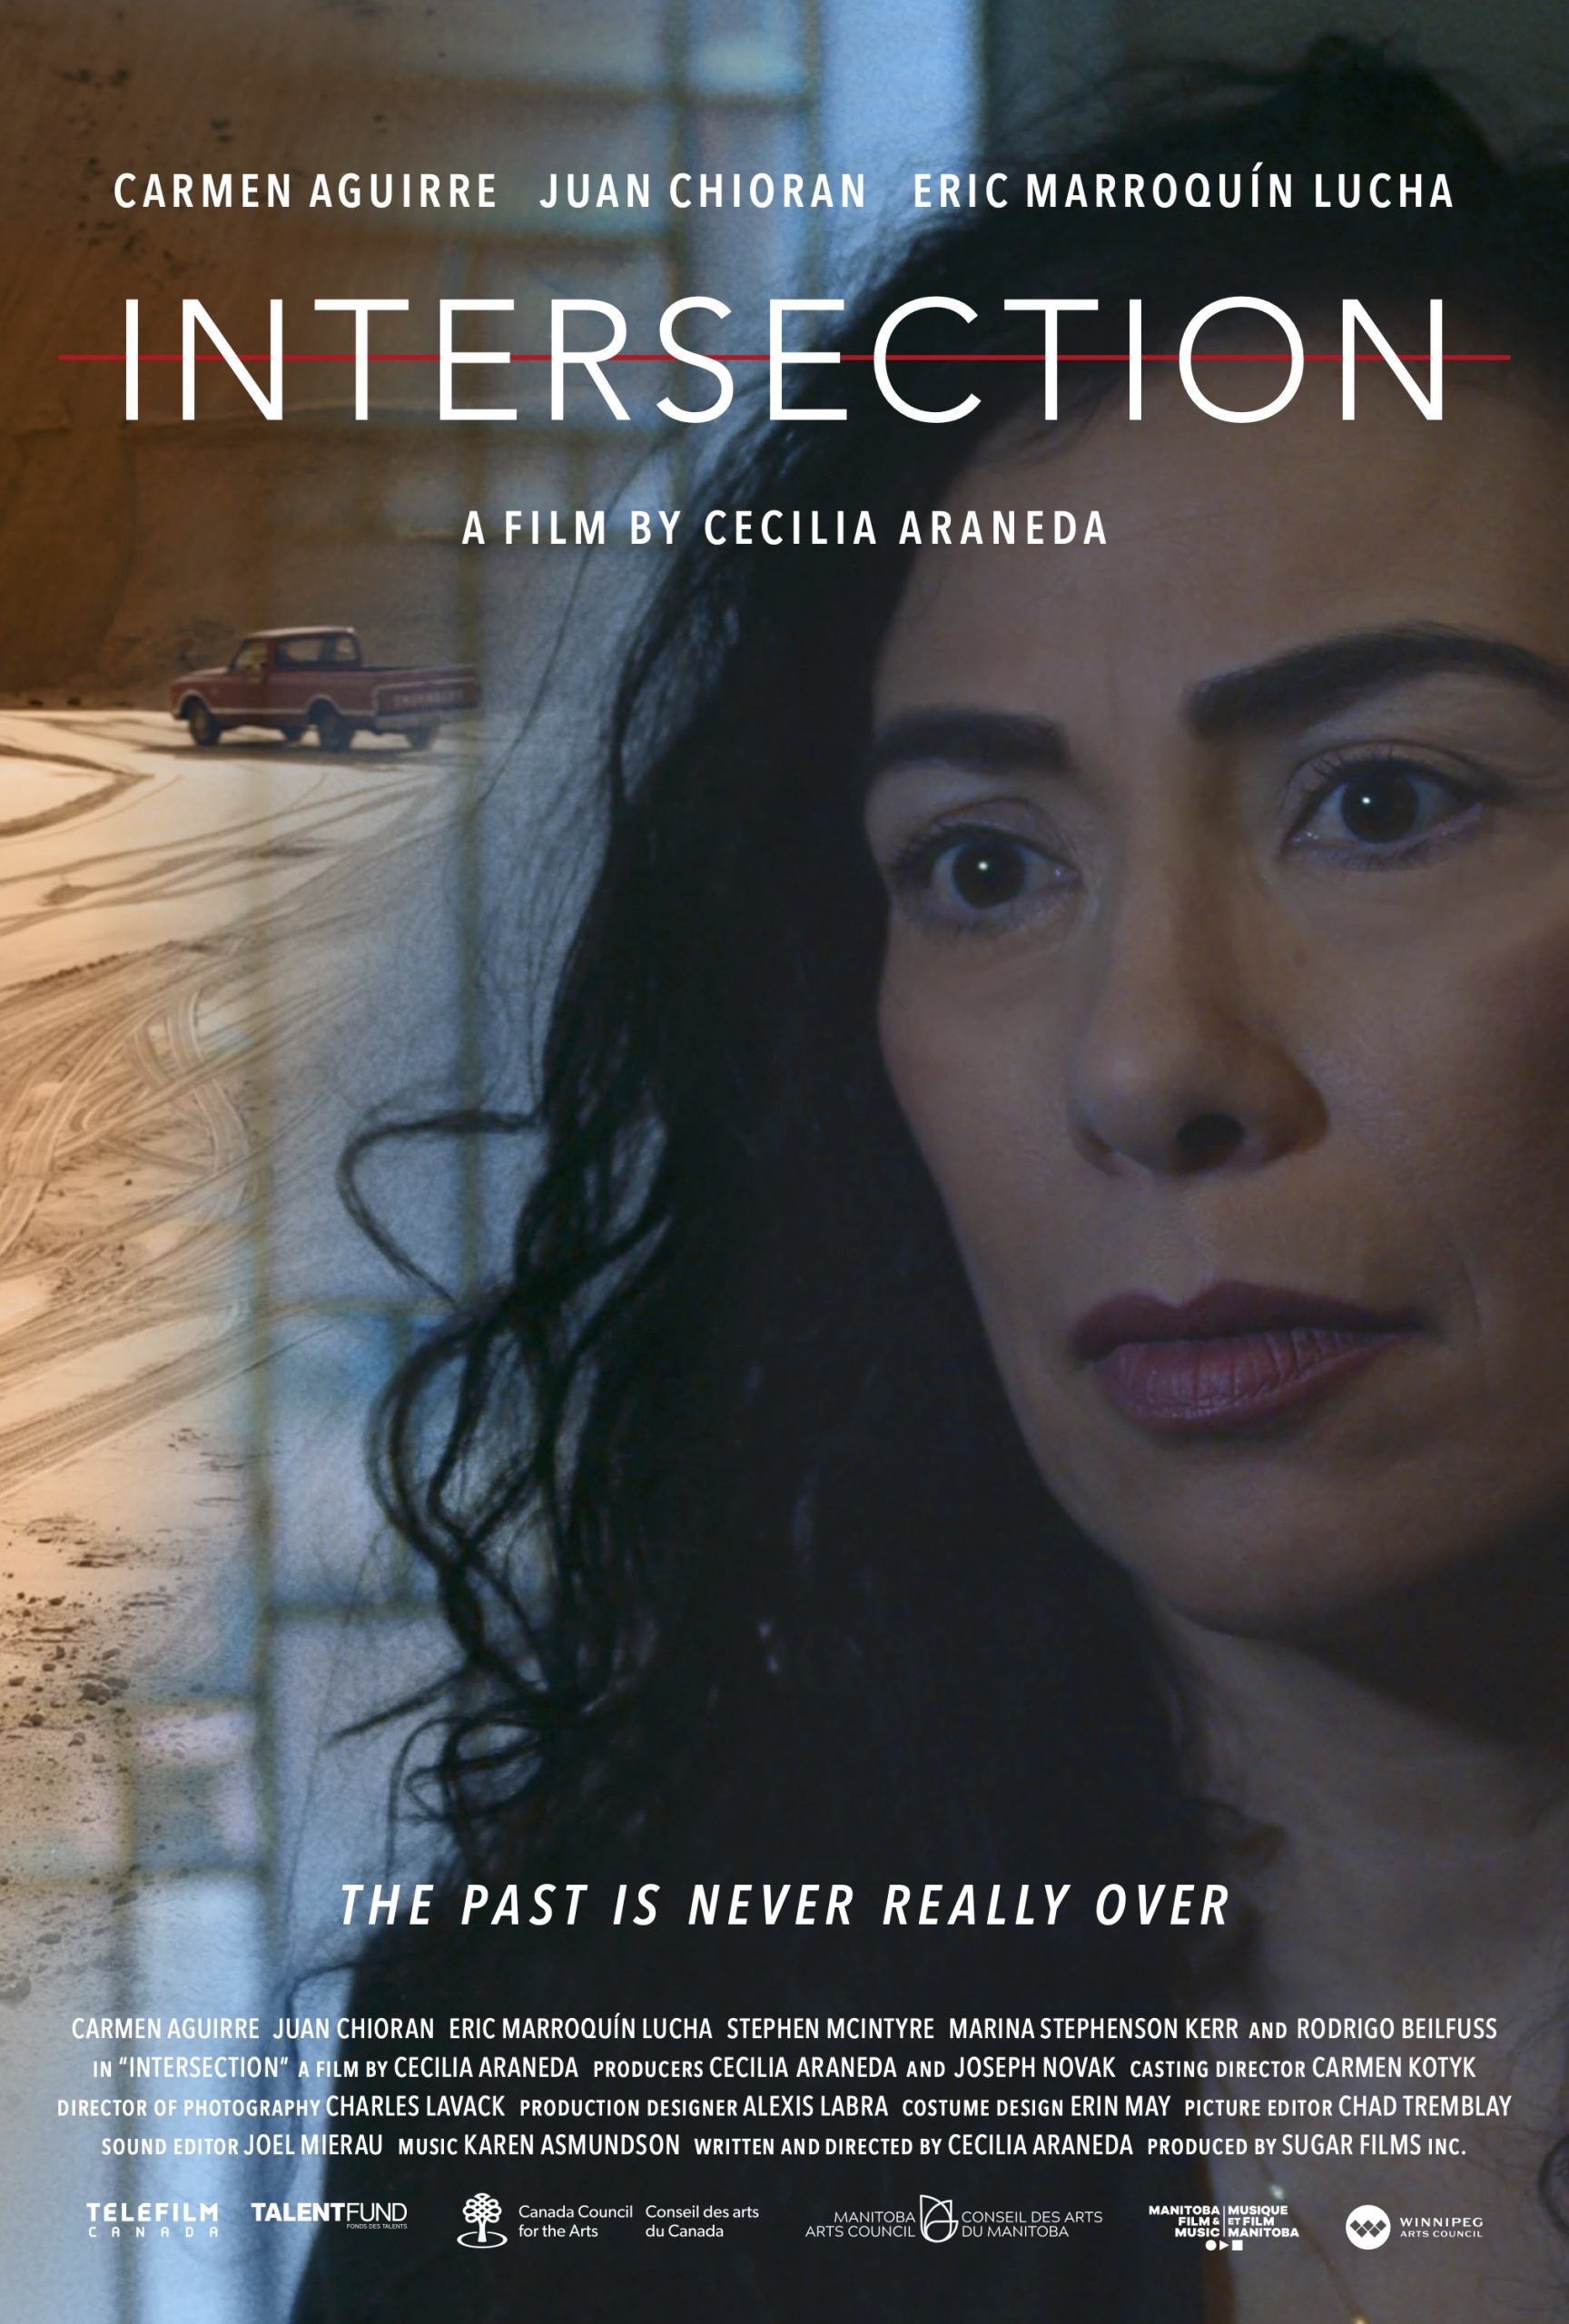 INTERSECTION, Vancouver premiere starring Carmen Aguirre